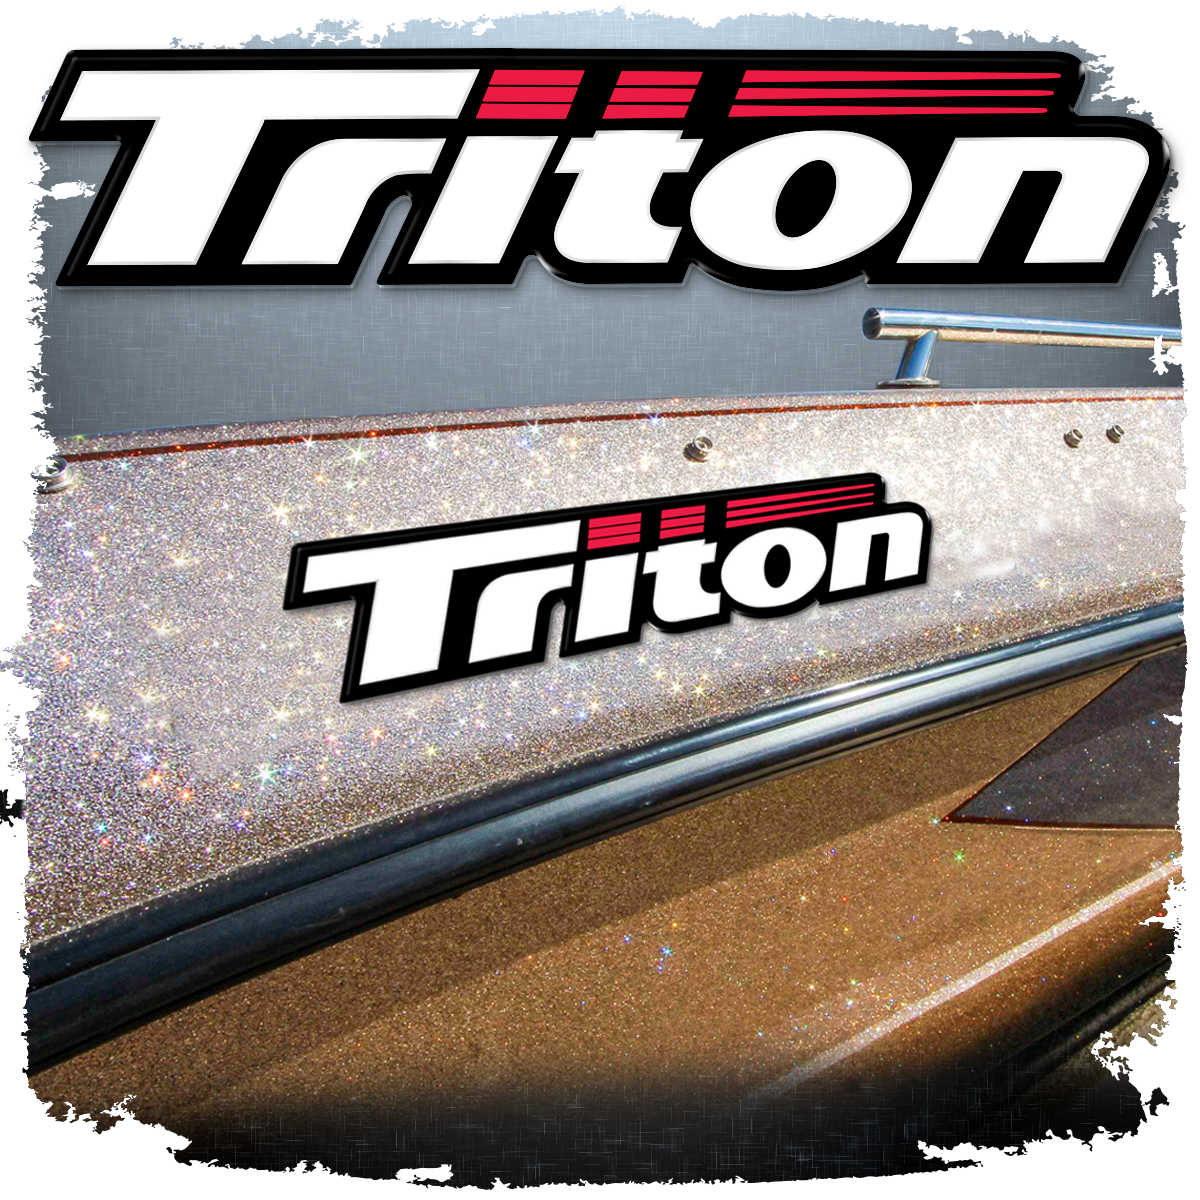 Domed Triton Boats Decal, Choose Your Size (1 Decal included)